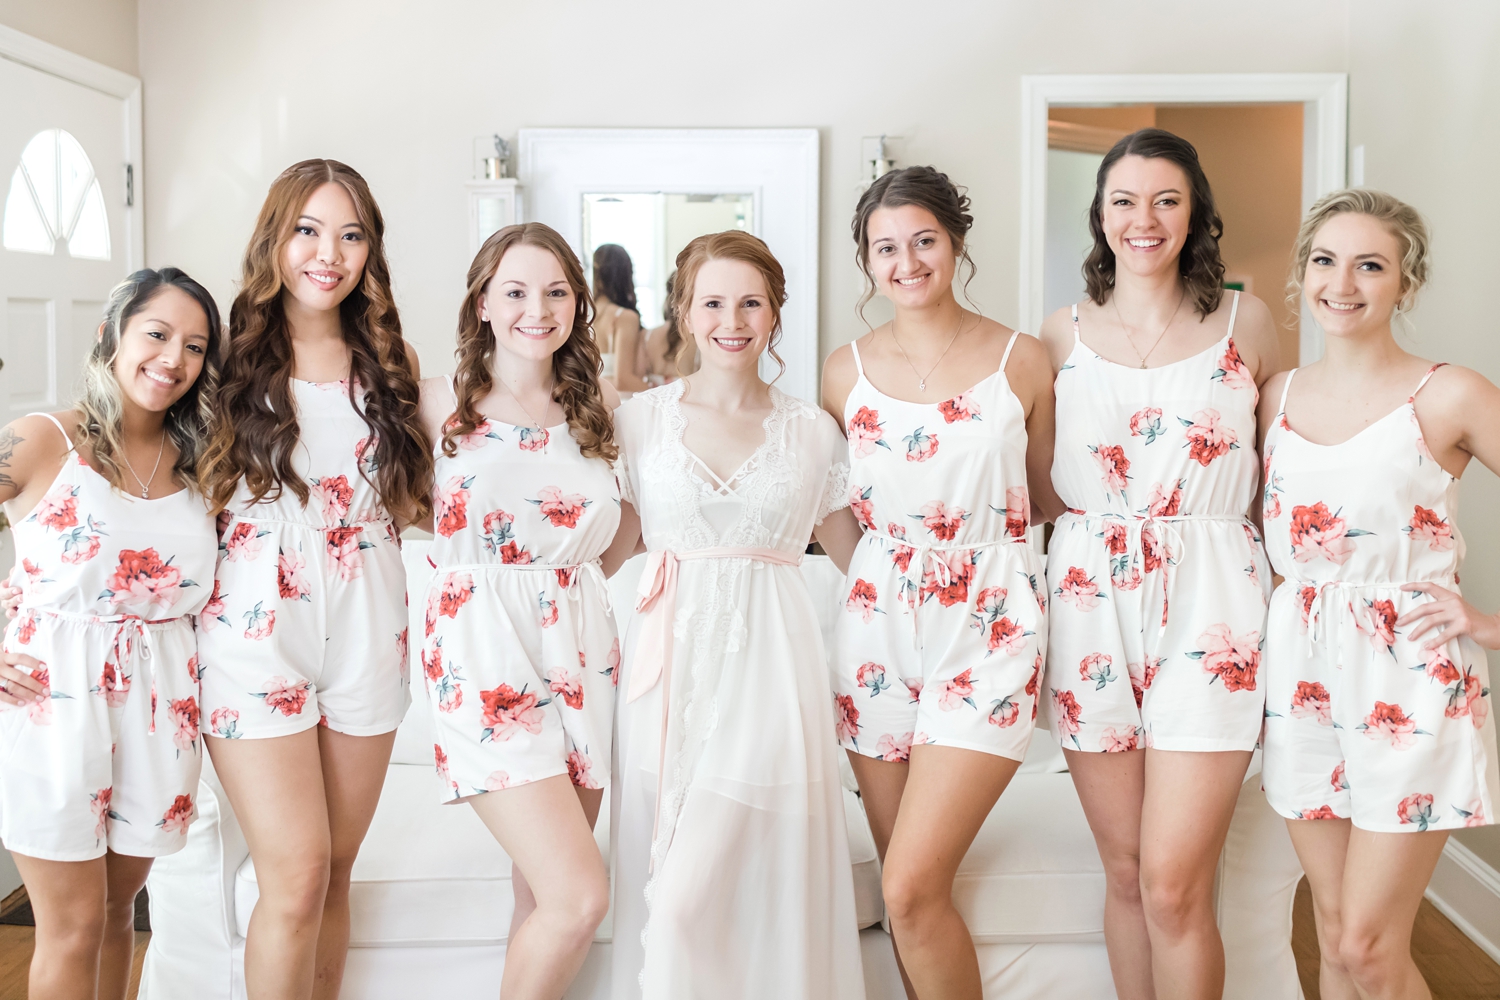  How adorable are these rompers?! And Jessica your robe is stunning! 